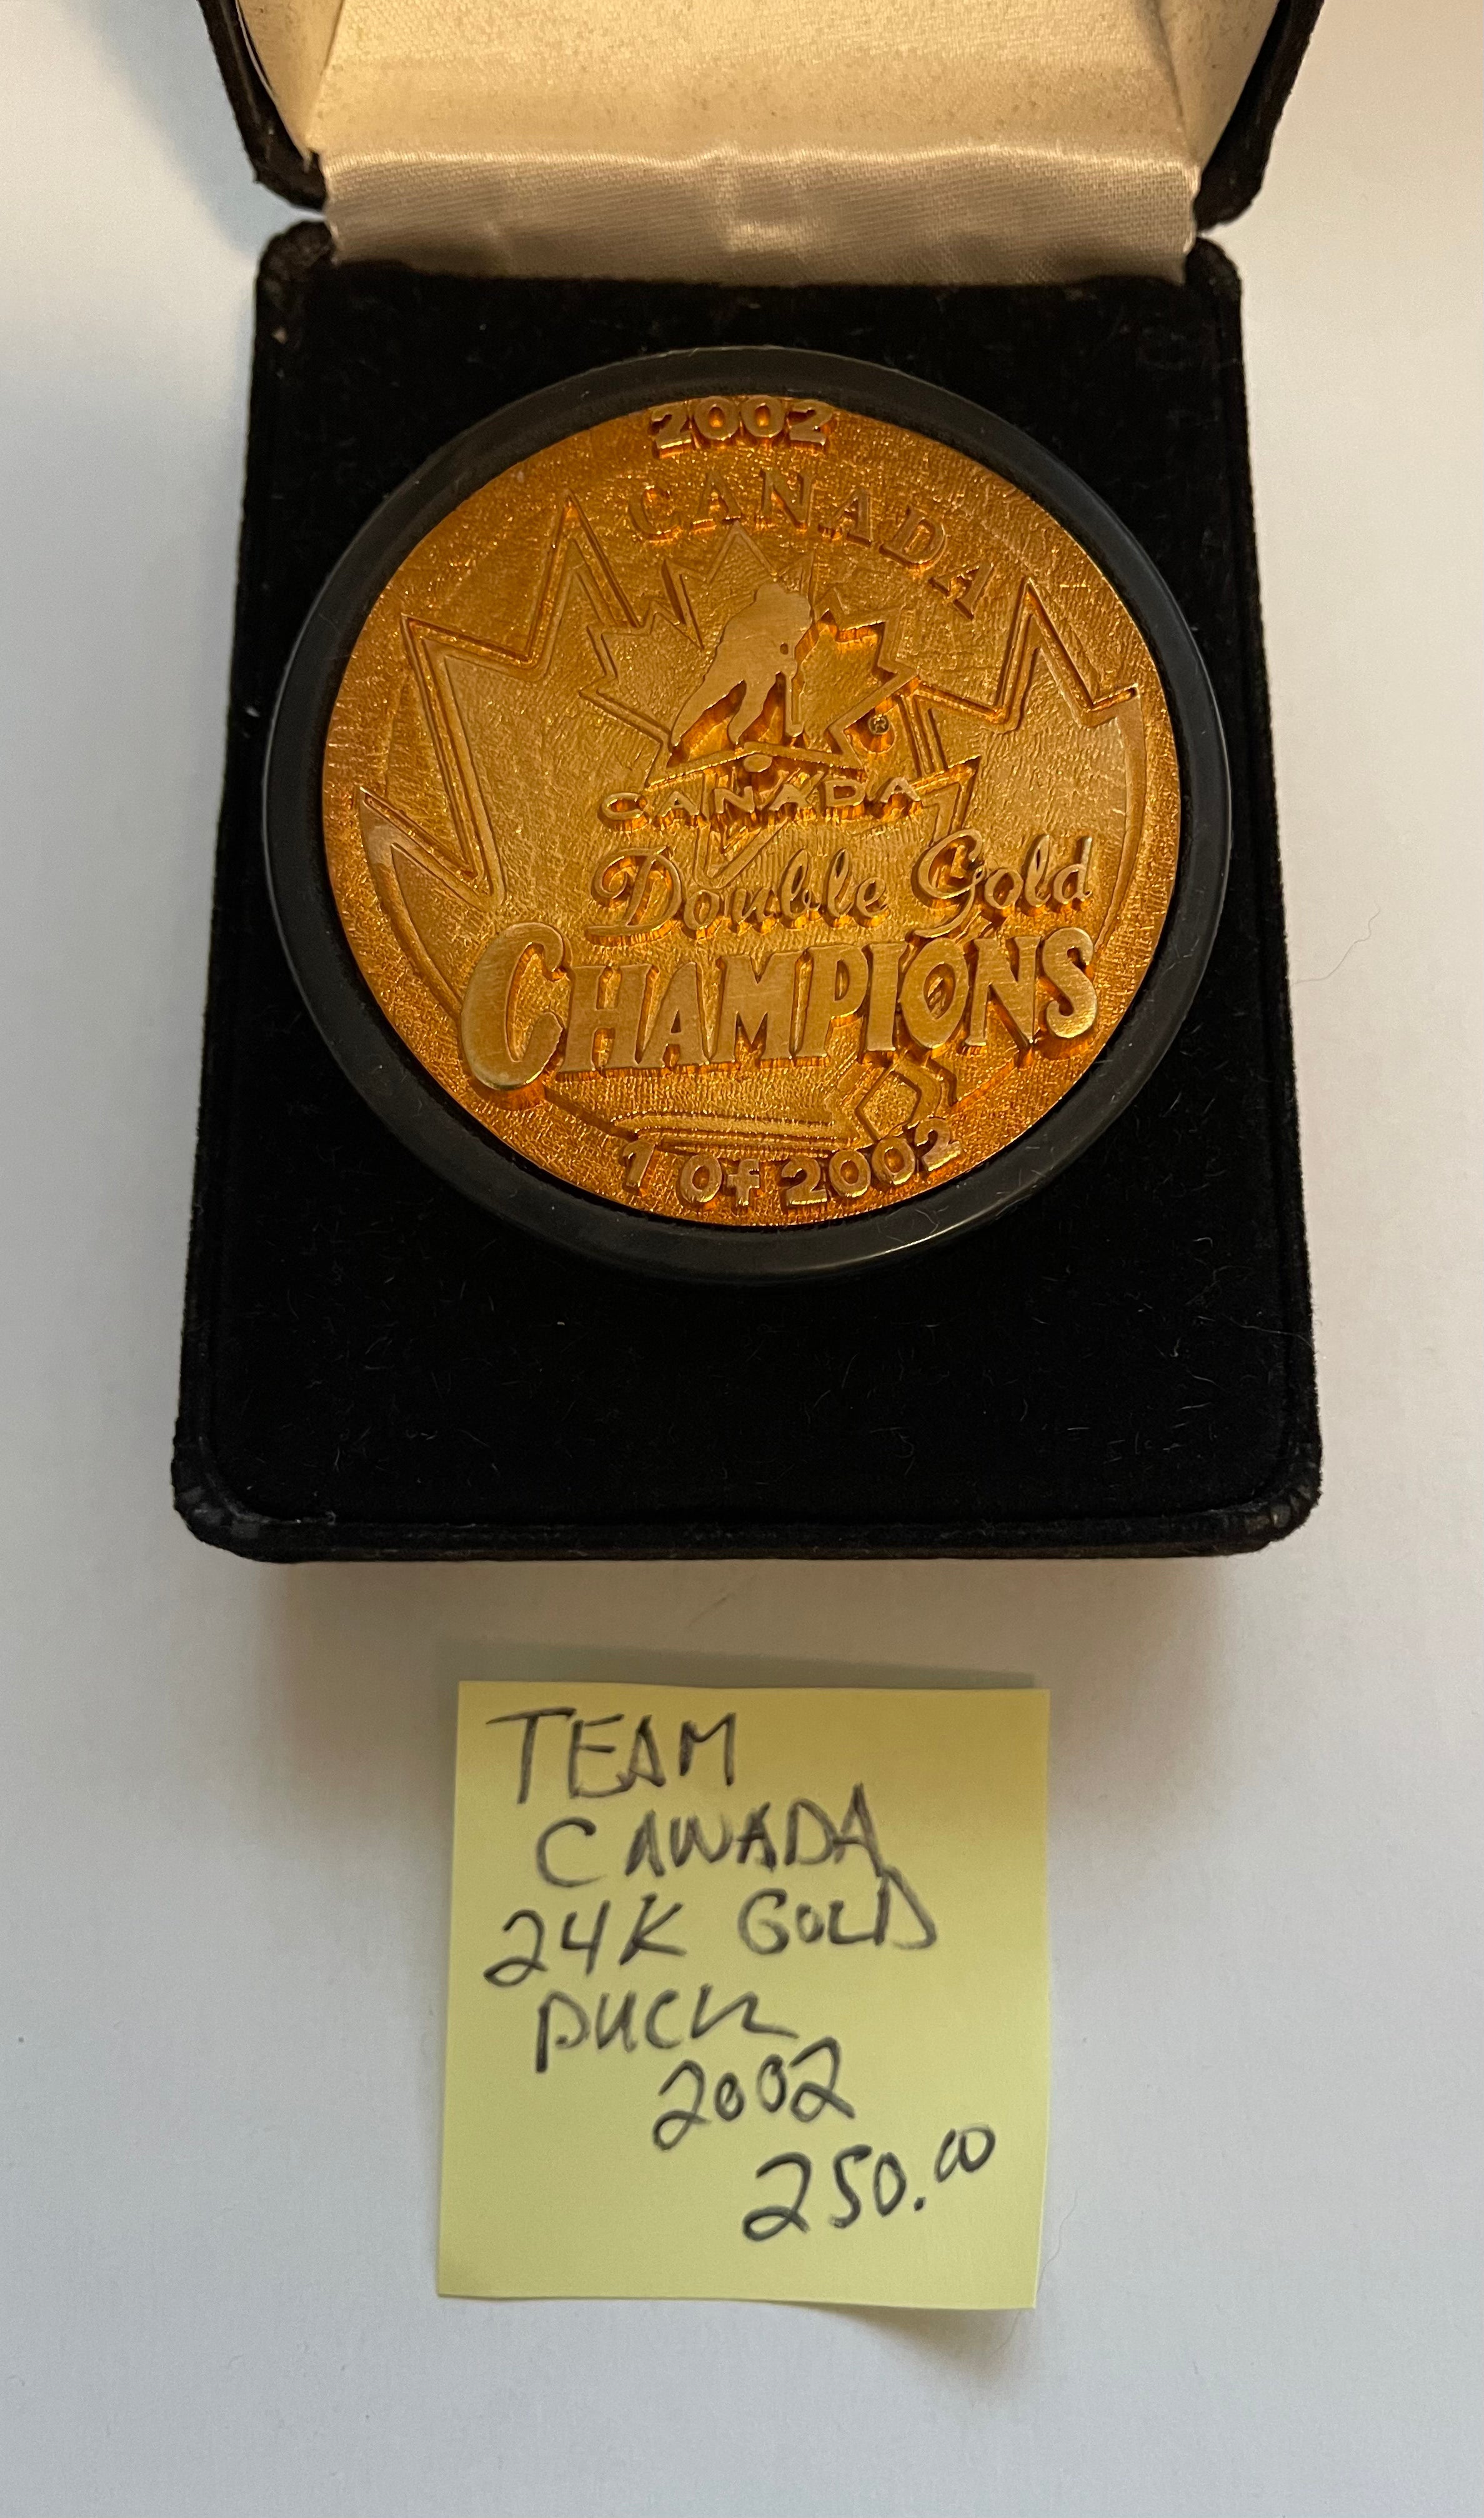 Team Canada rare 24K gold special issued puck 2002